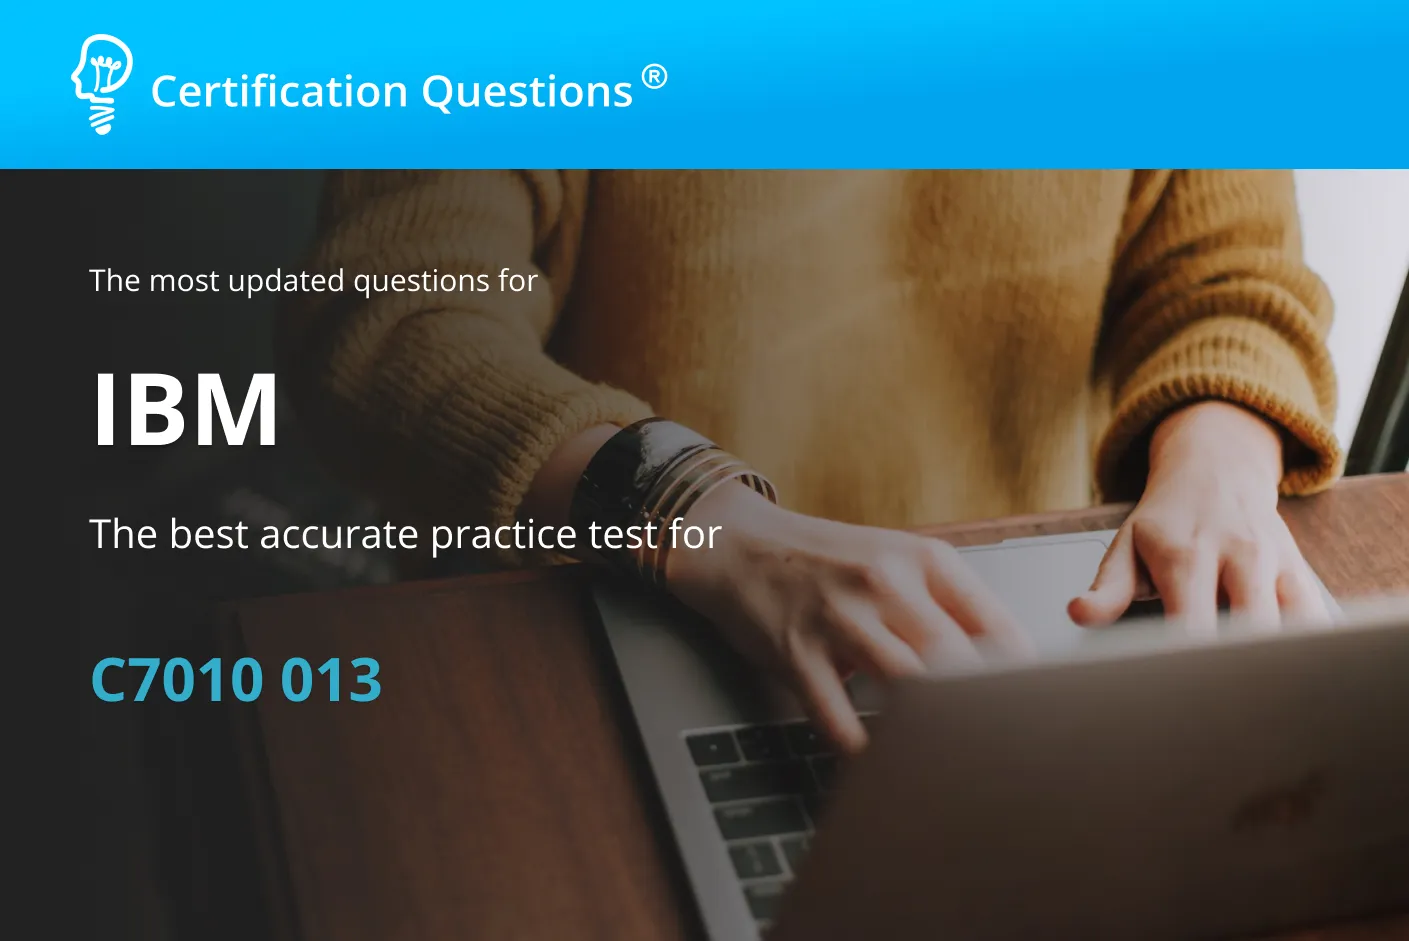 This guide is related to c7010 013 Practice Test in the USA